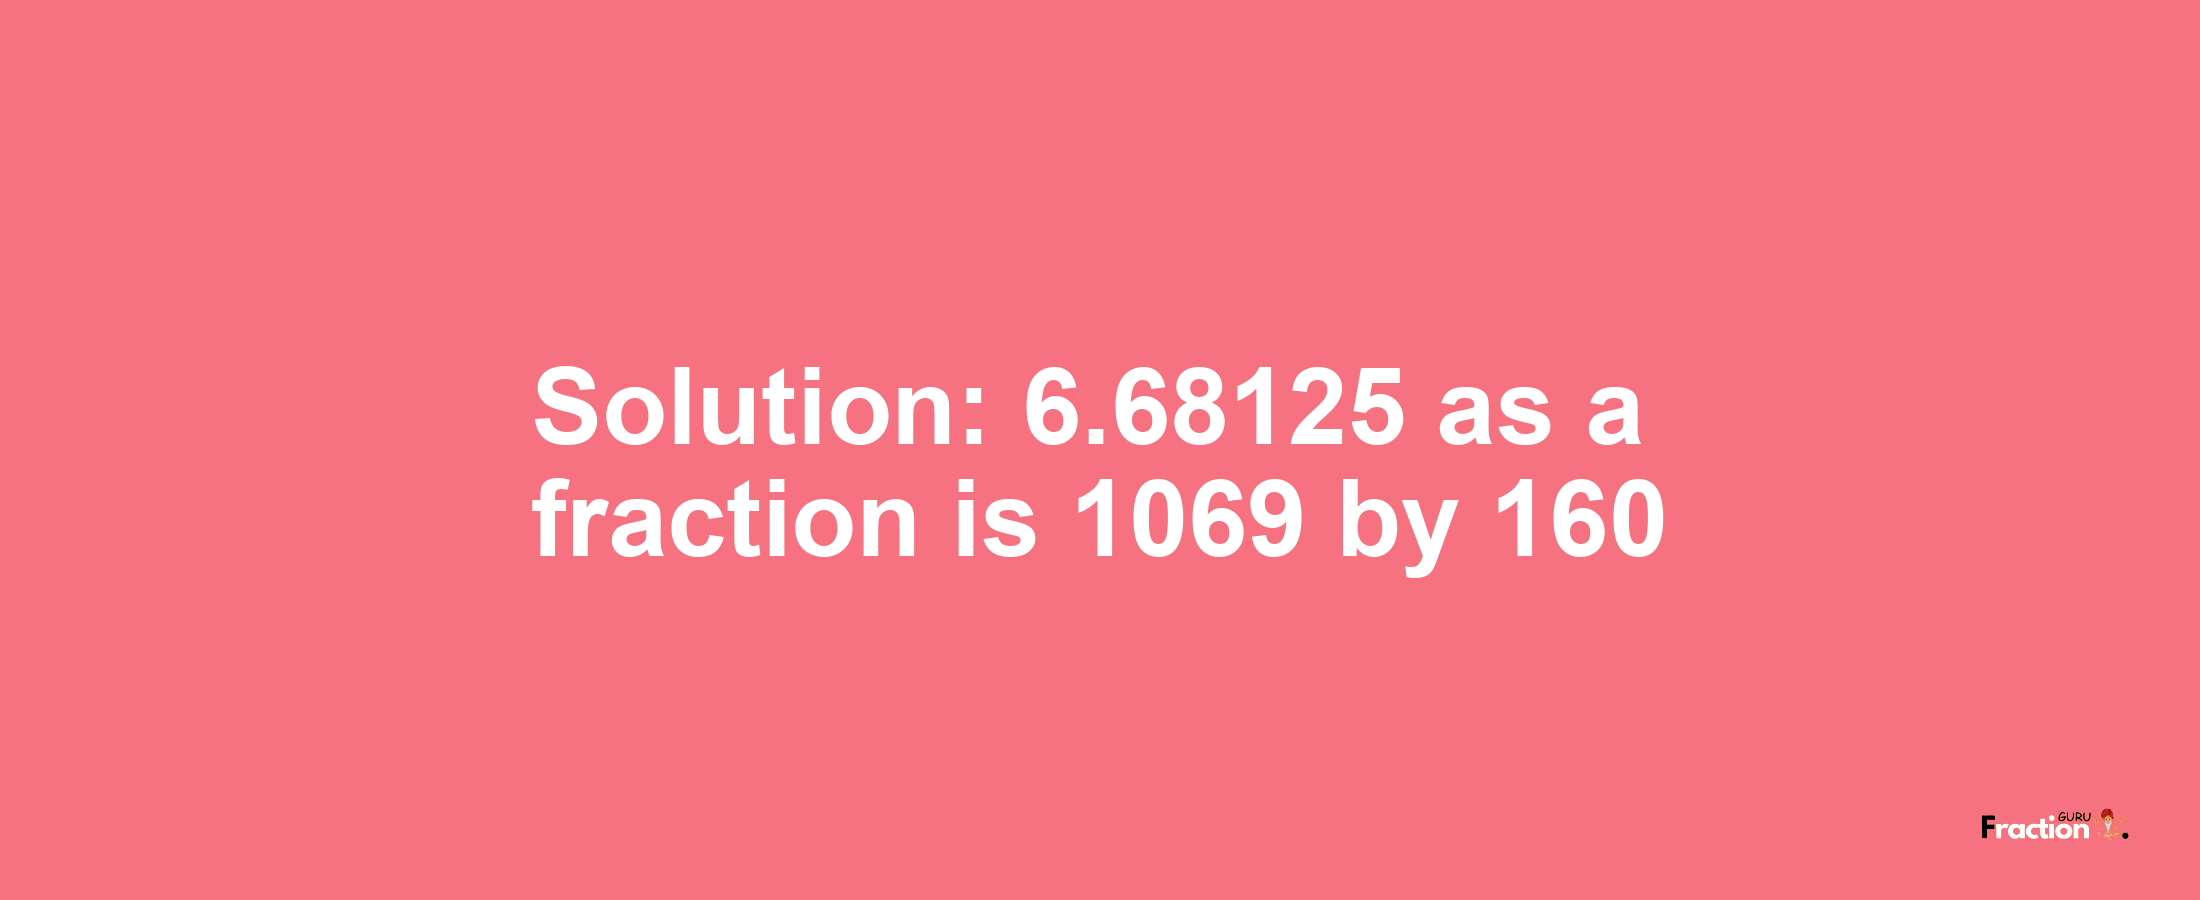 Solution:6.68125 as a fraction is 1069/160